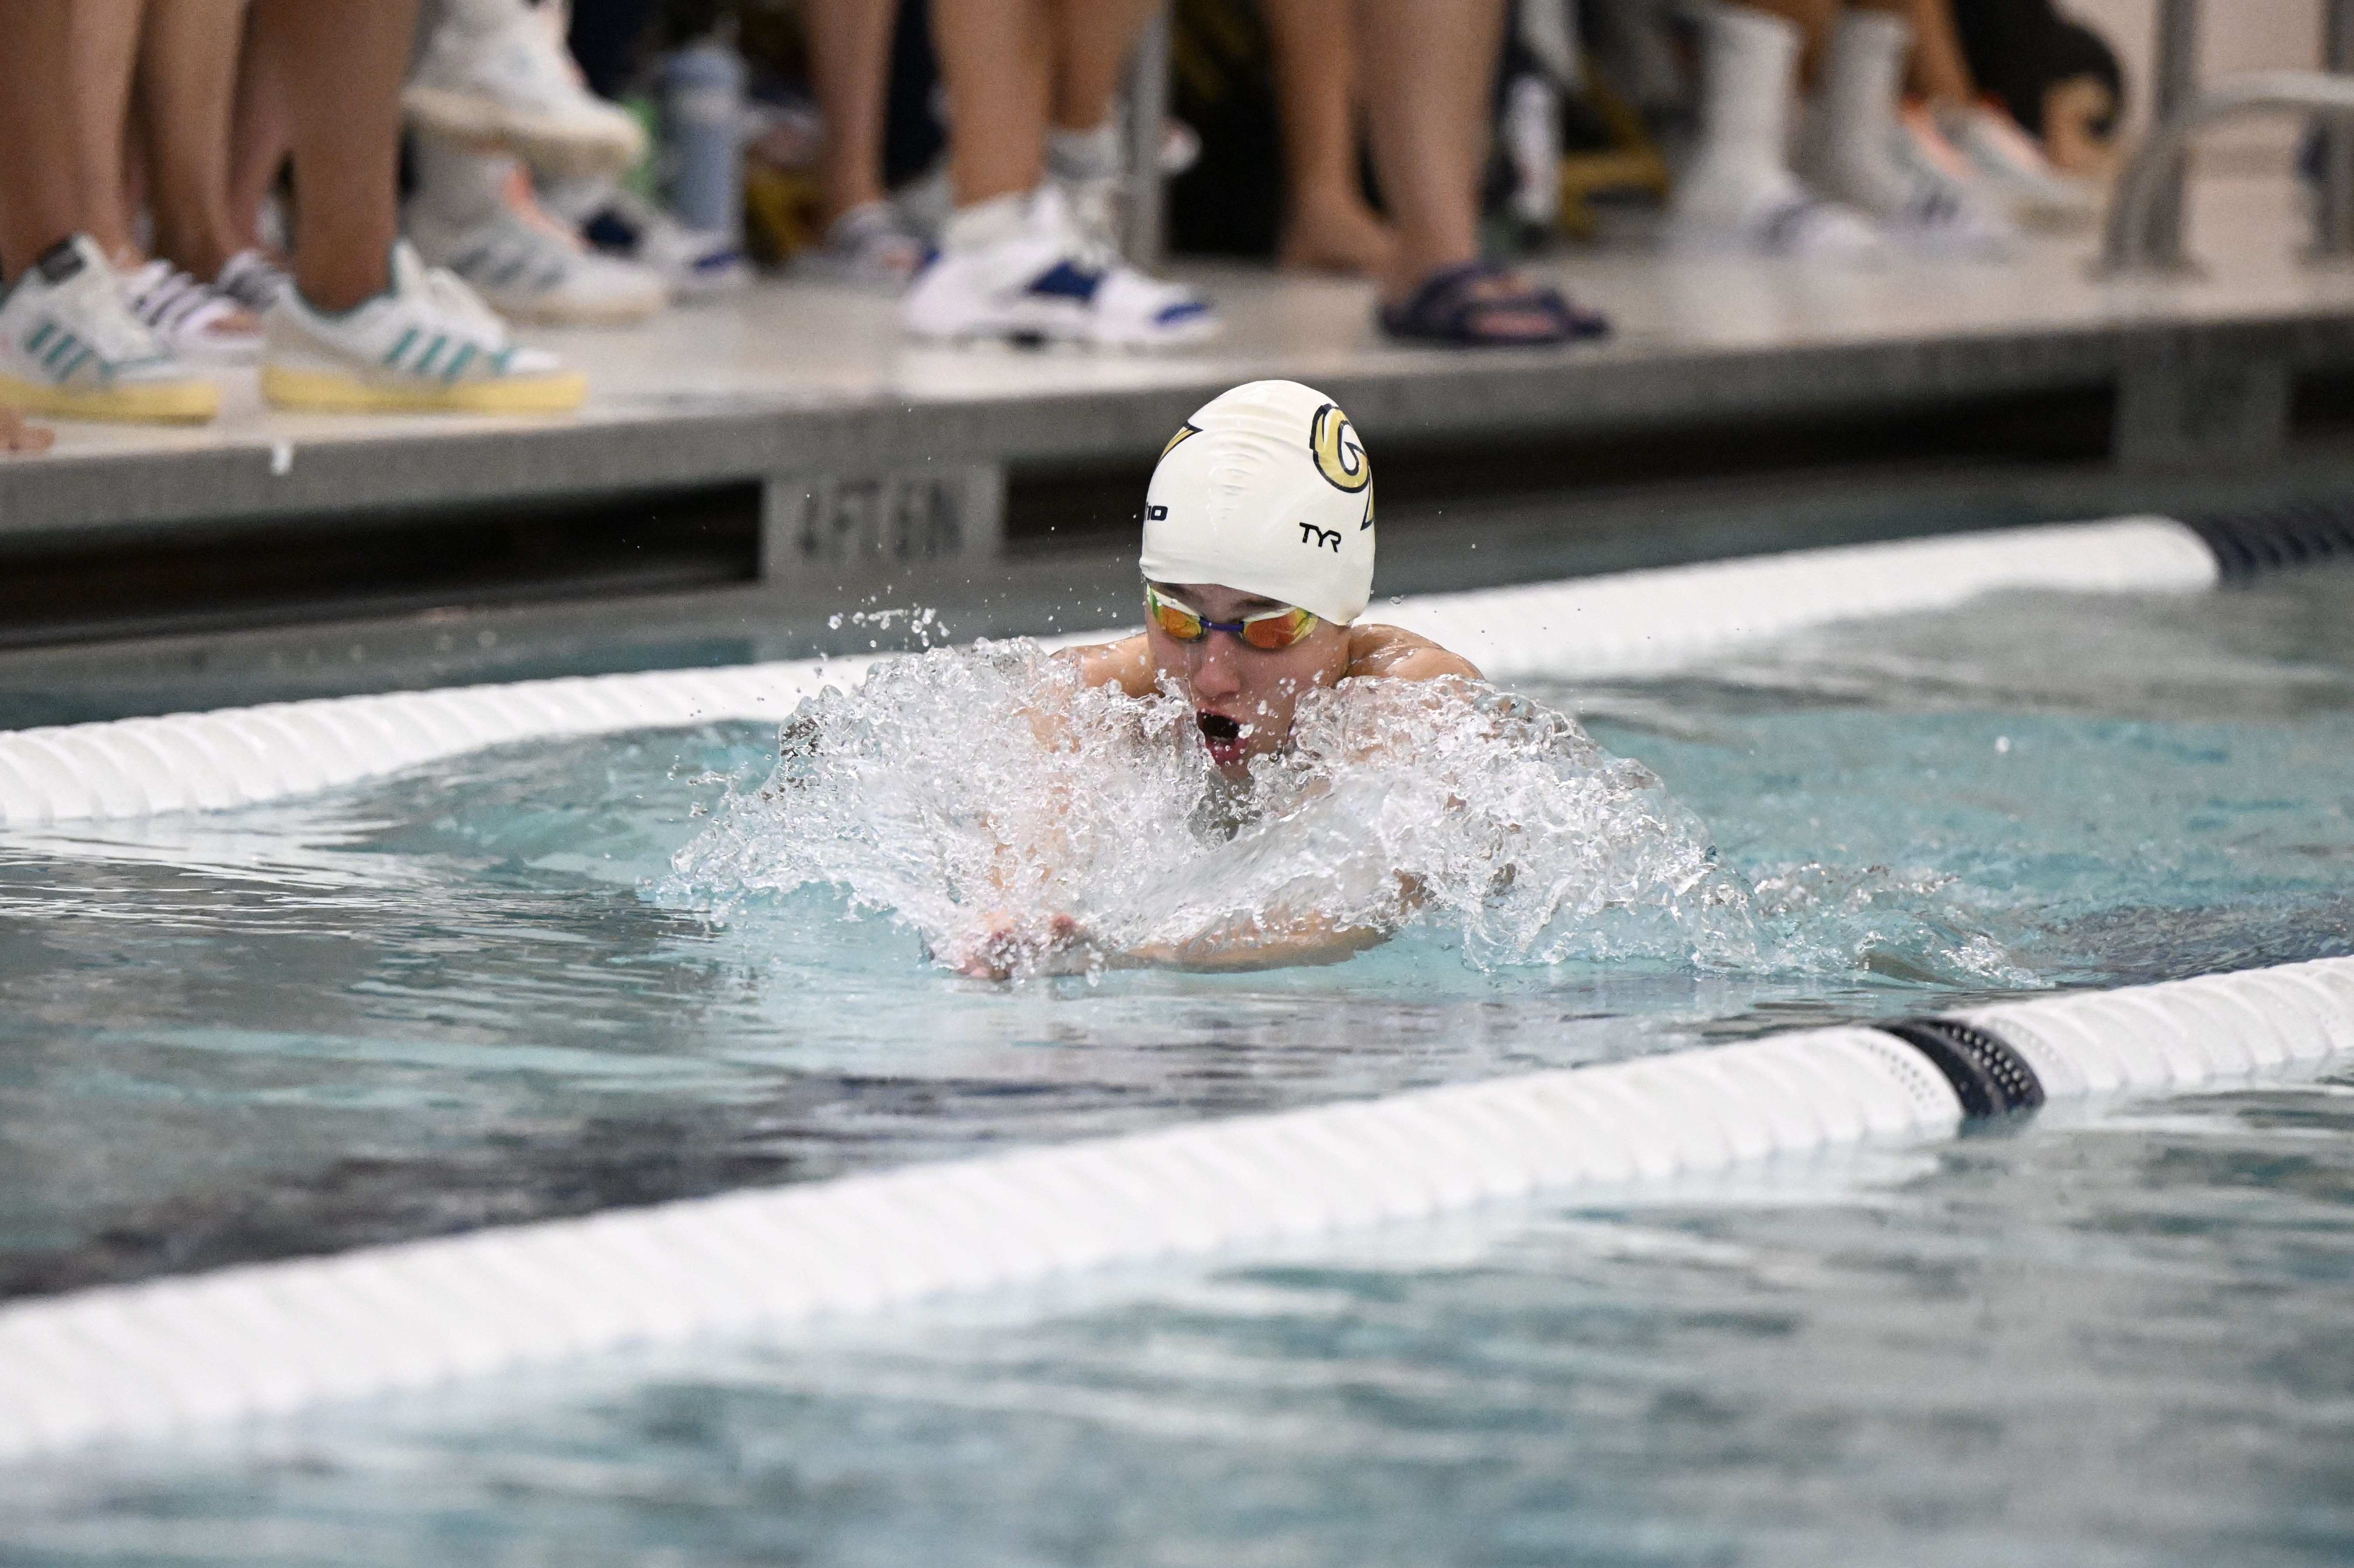 Julia Knox competes in the 200 meter breaststroke. (GW Sports)